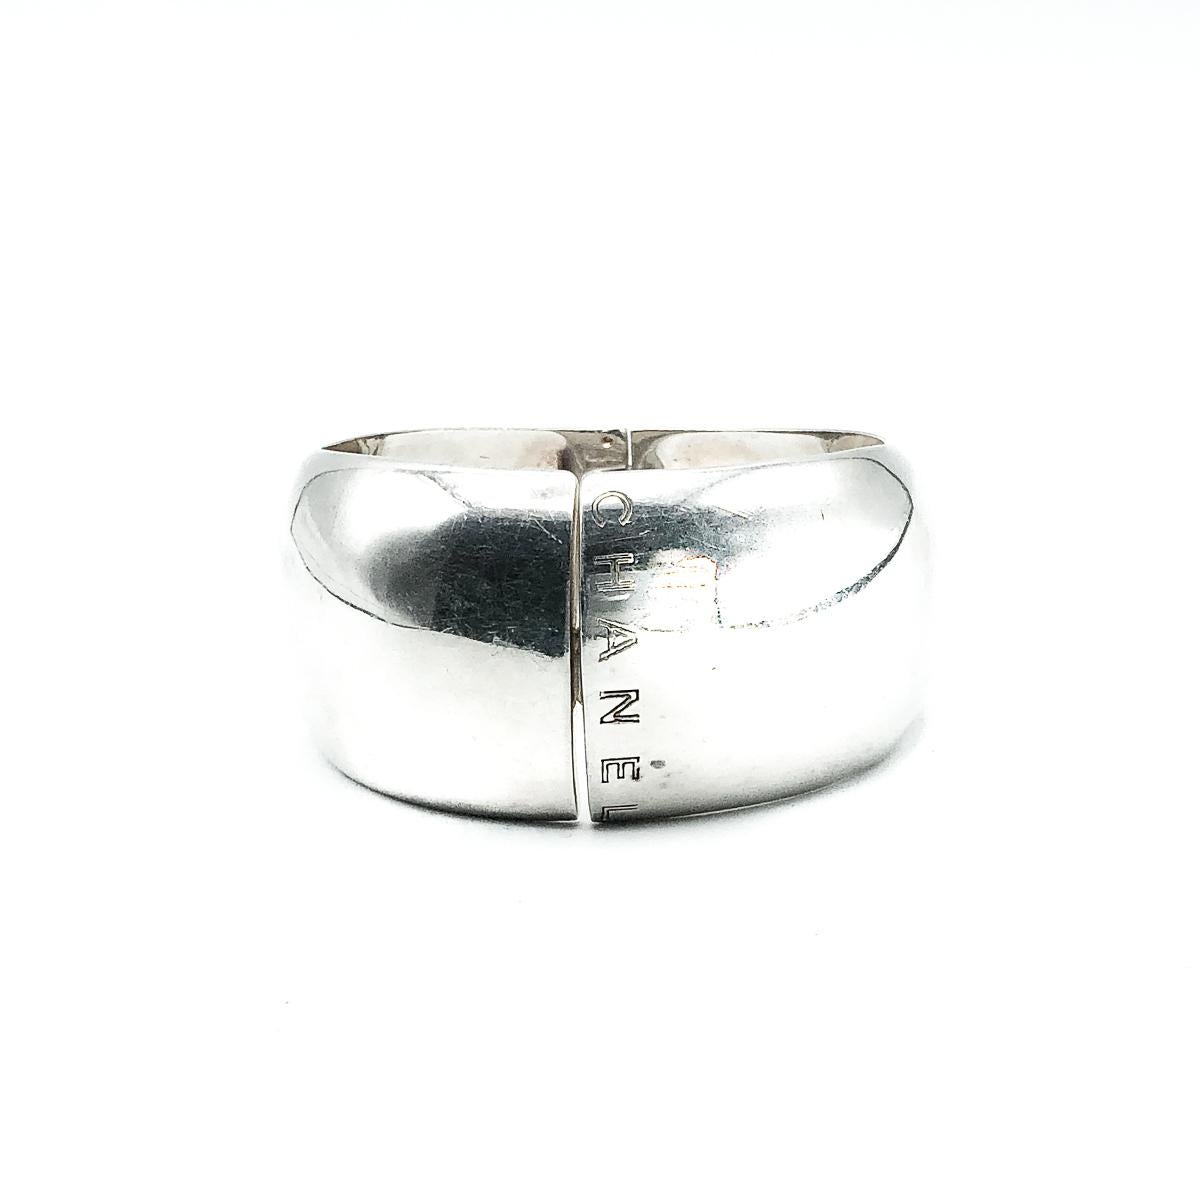 A stunning statement Vintage Chanel Silver Cuff. Large and bold and crafted with a weighty amount of solid silver. Finished with the CHANEL lettering to the front edge. In very good vintage condition, signed and stamped with full French silver 925